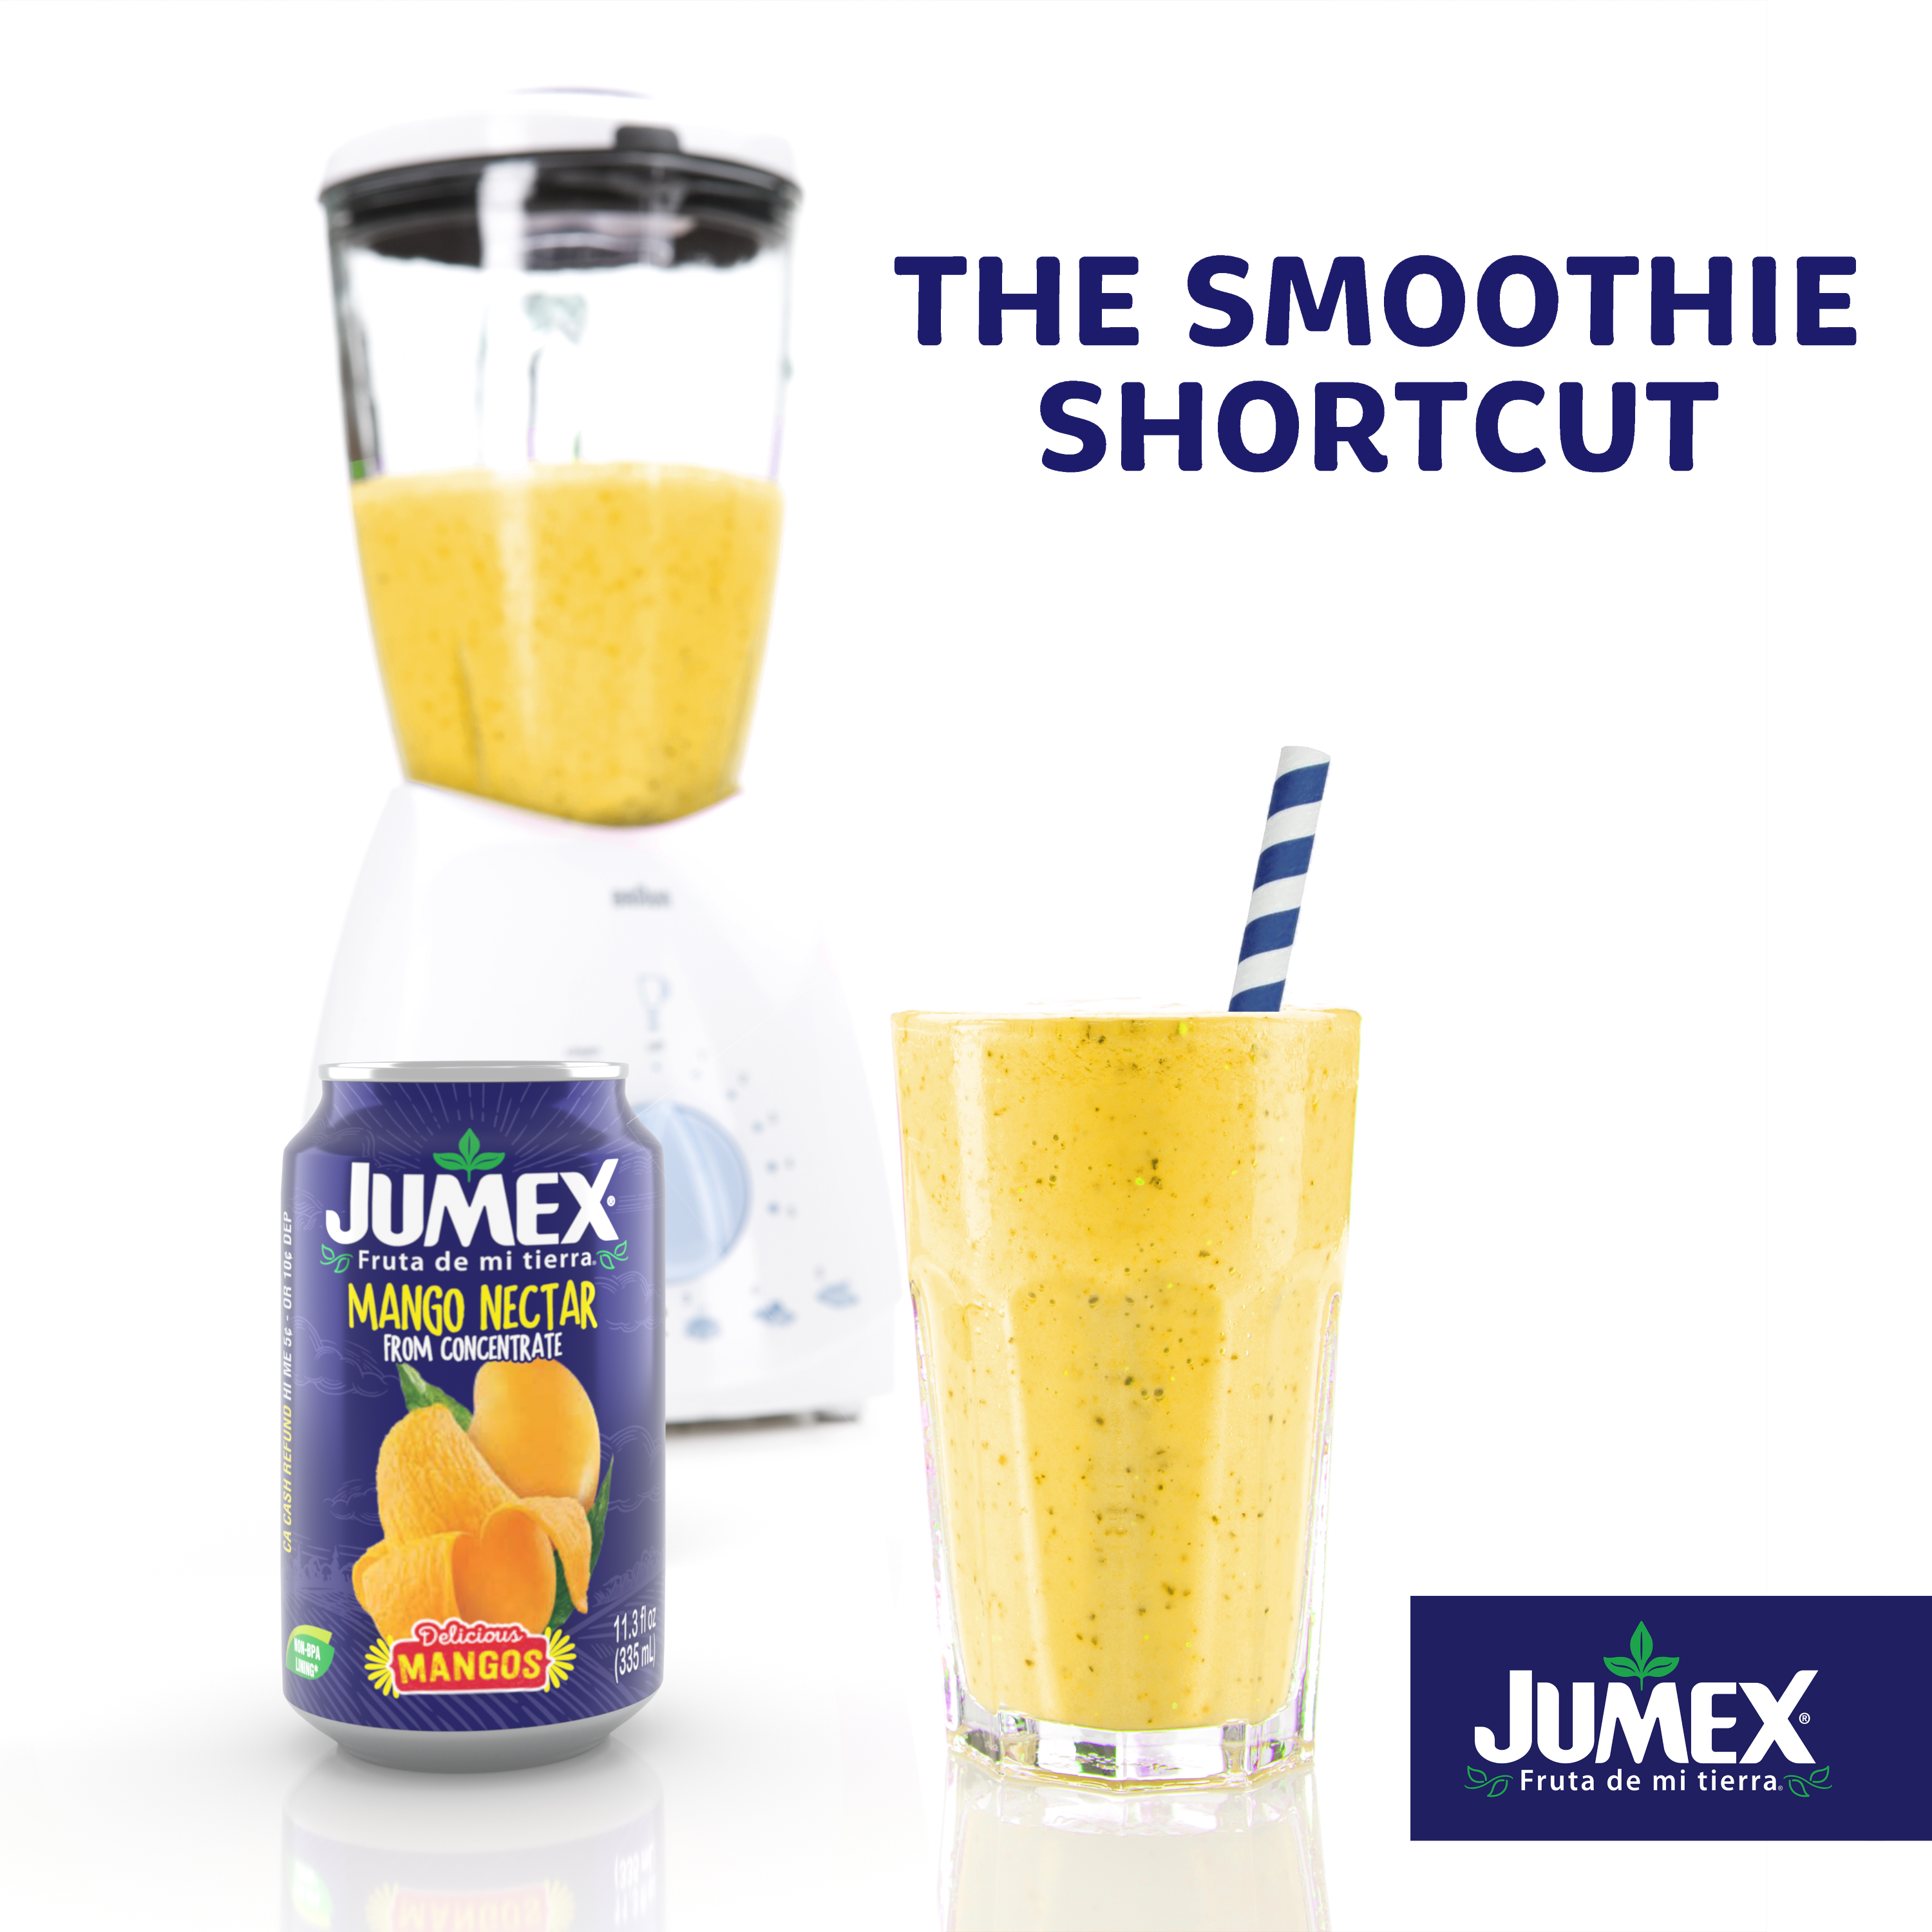 Jumex Mango Nectar from Concentrate, 11.3 Fl. oz. - image 4 of 6